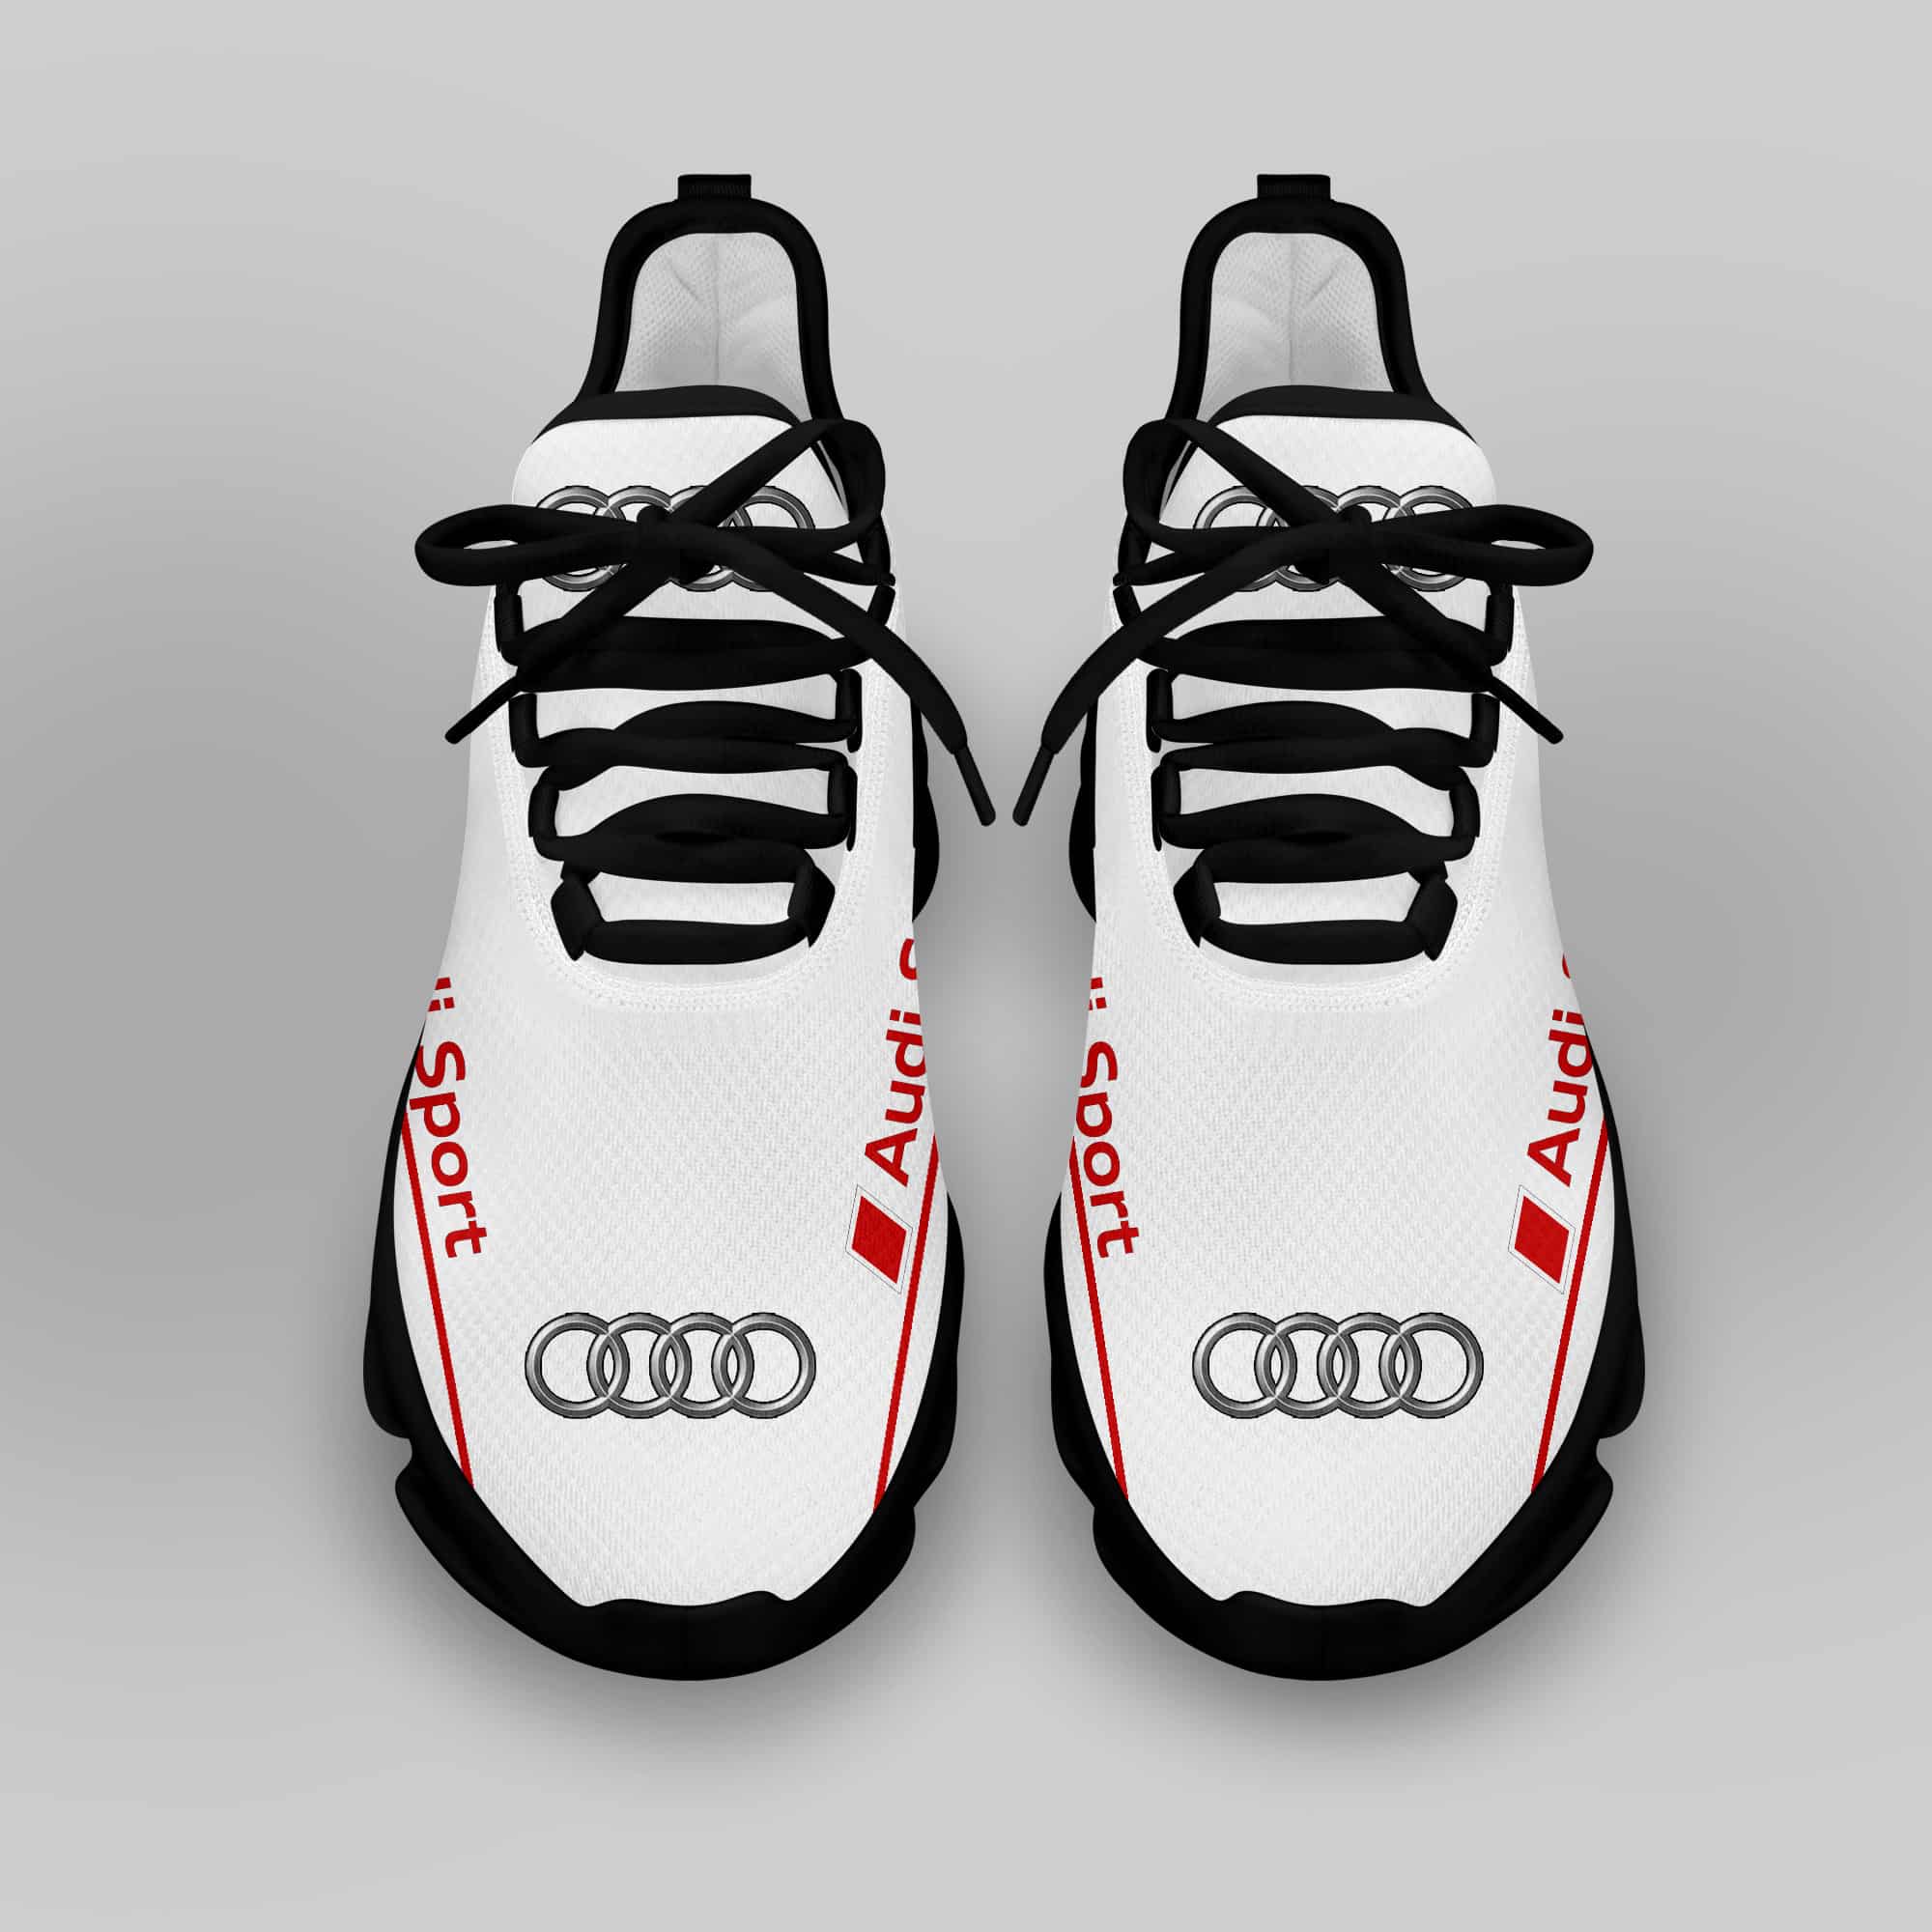 Audi Sport Running Shoes Max Soul Shoes Sneakers Ver 19 4